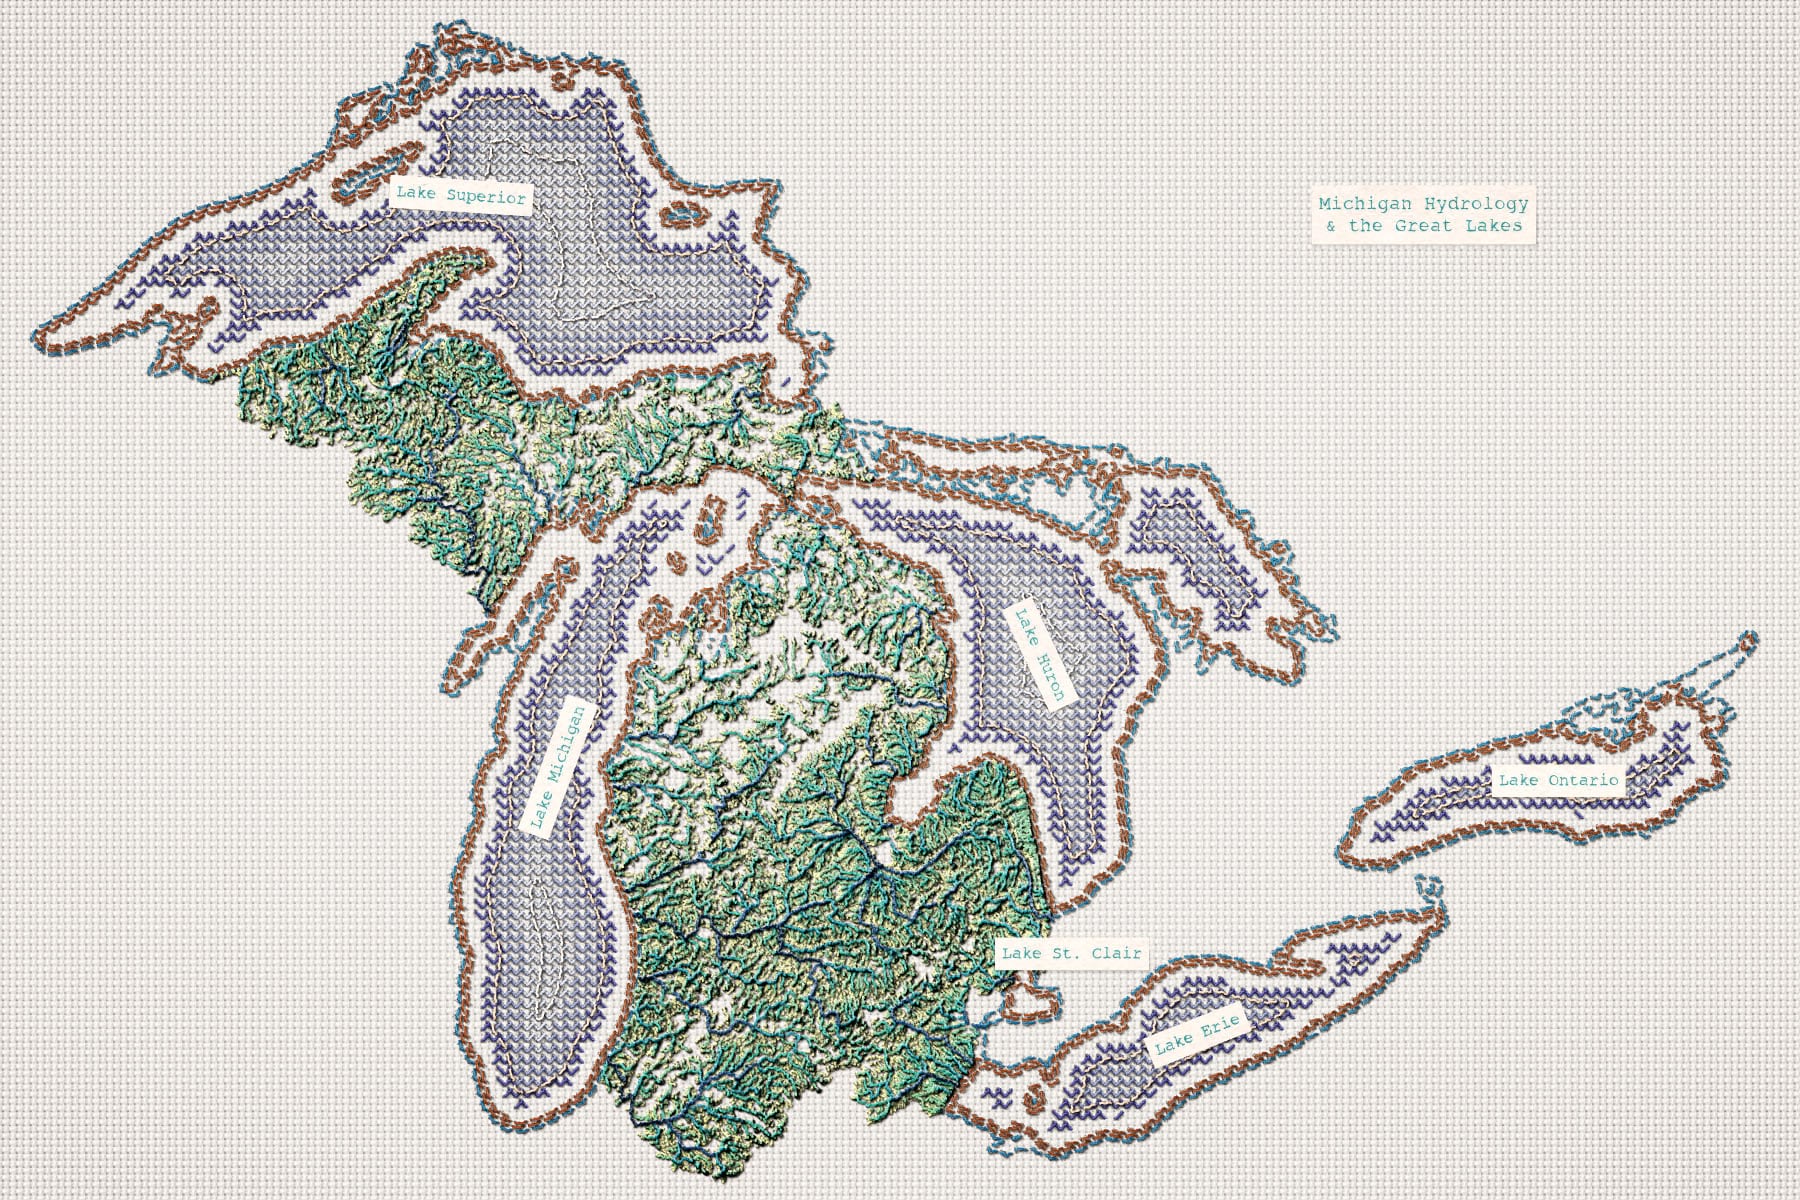 Map made in ArcGIS Pro using the "sampler" style.